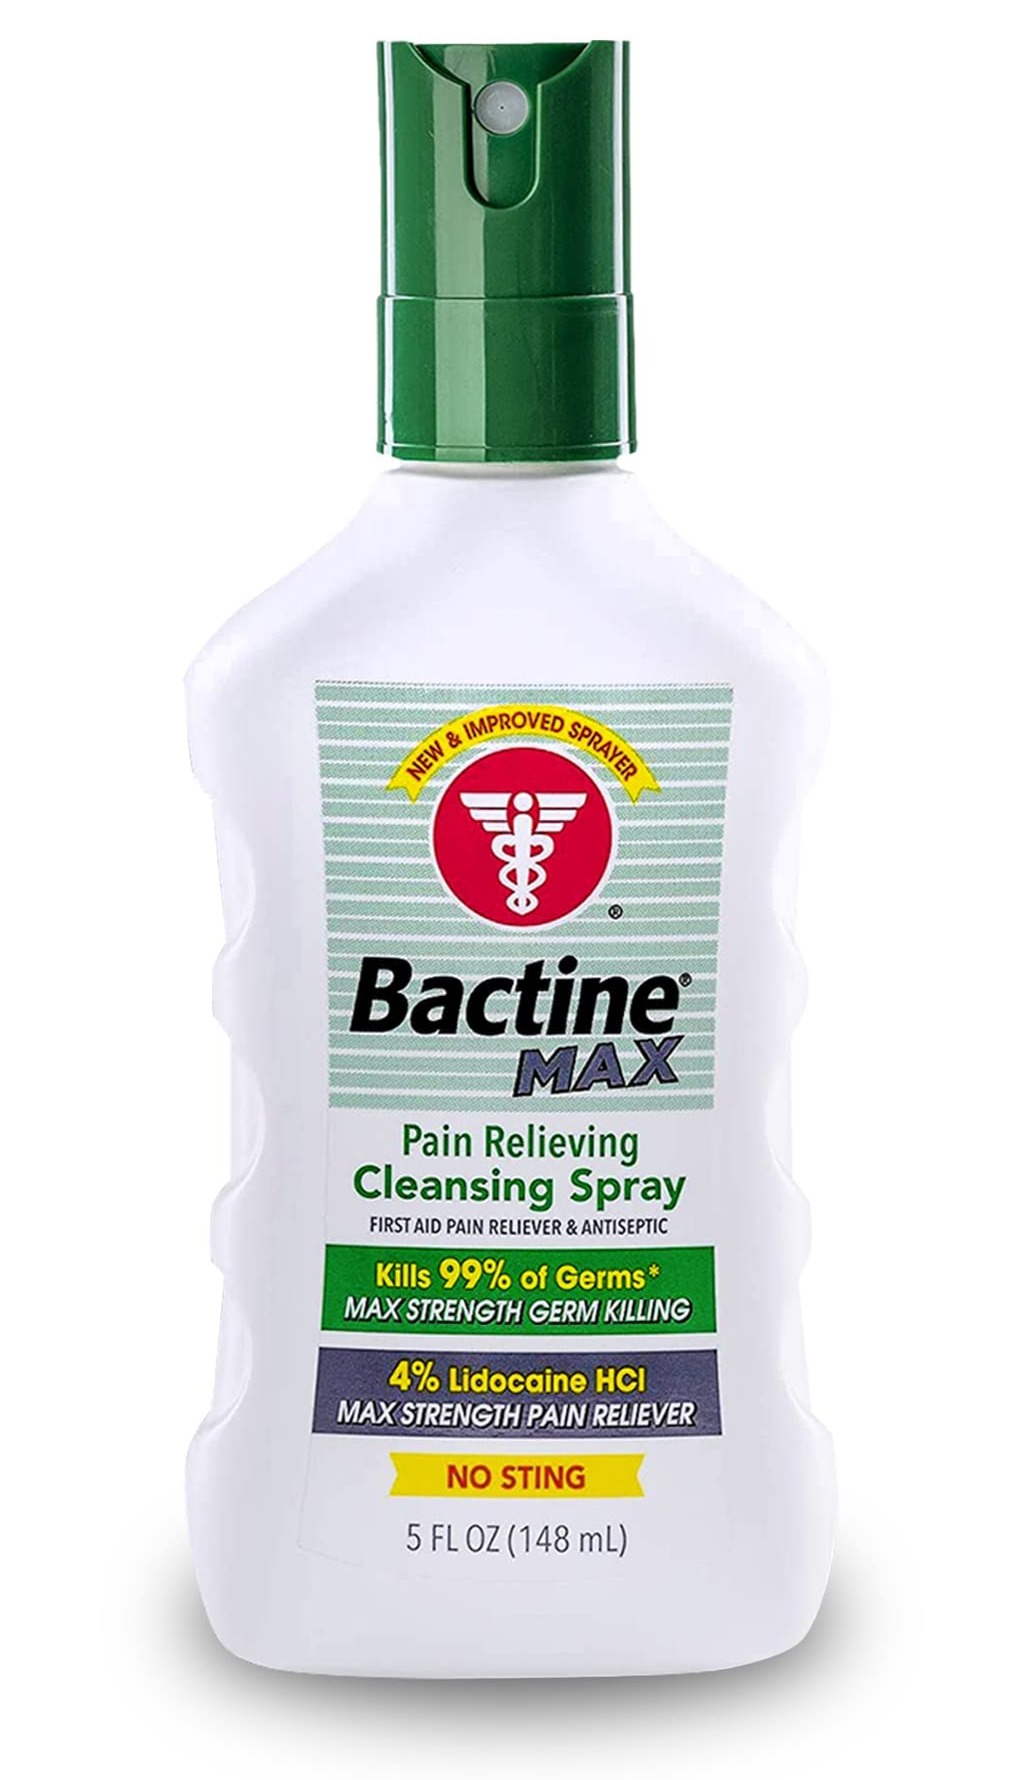 [S&S] $2.67: 5-Oz Bactine Max First Aid Pain Relief Cleansing Spray w/ 4% Lidocaine at Amazon